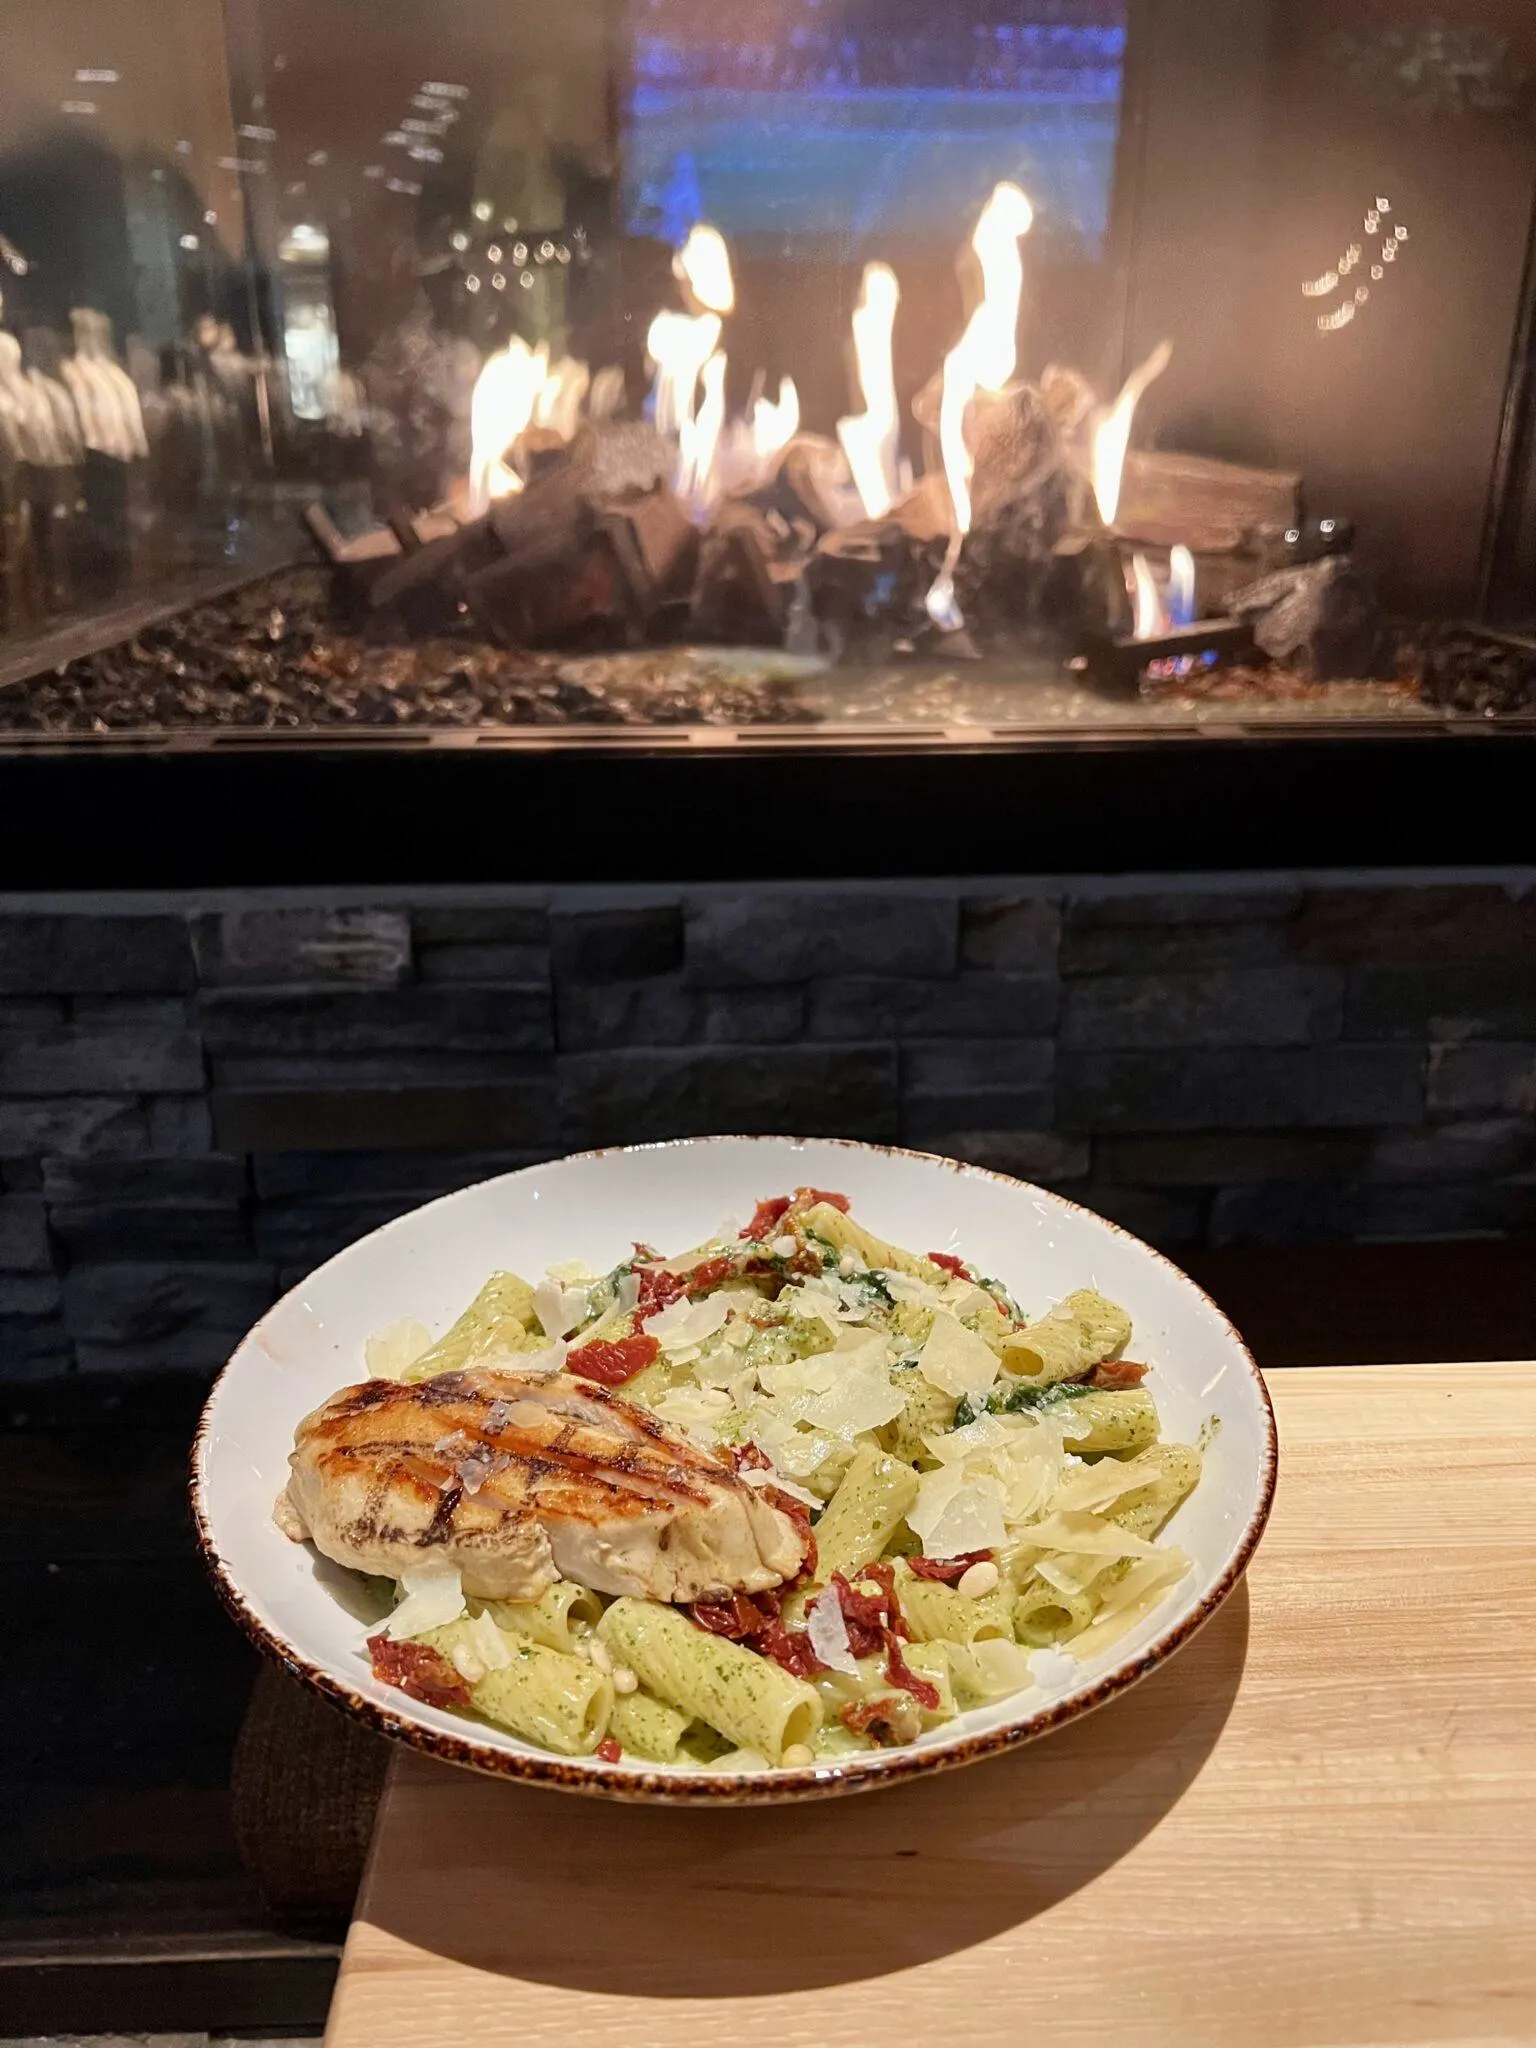 Pasta dish in front of fireplace